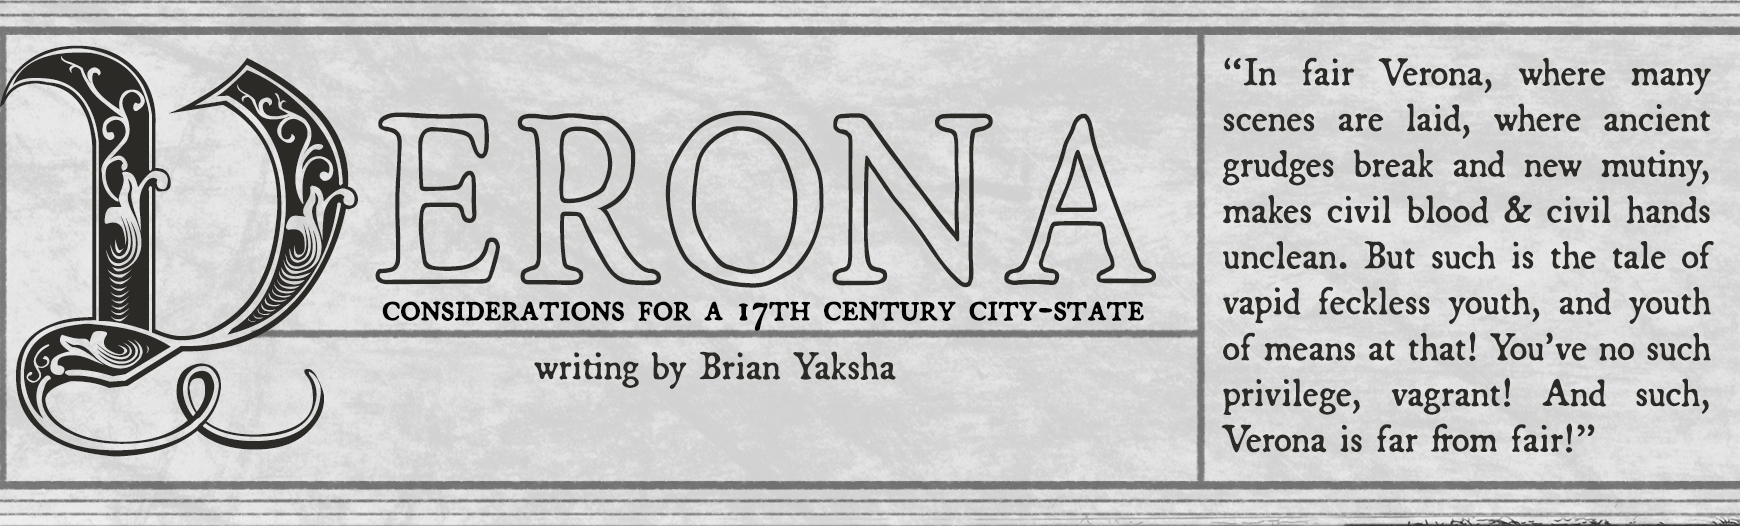 Verona: Considerations for a 17th Century City-State